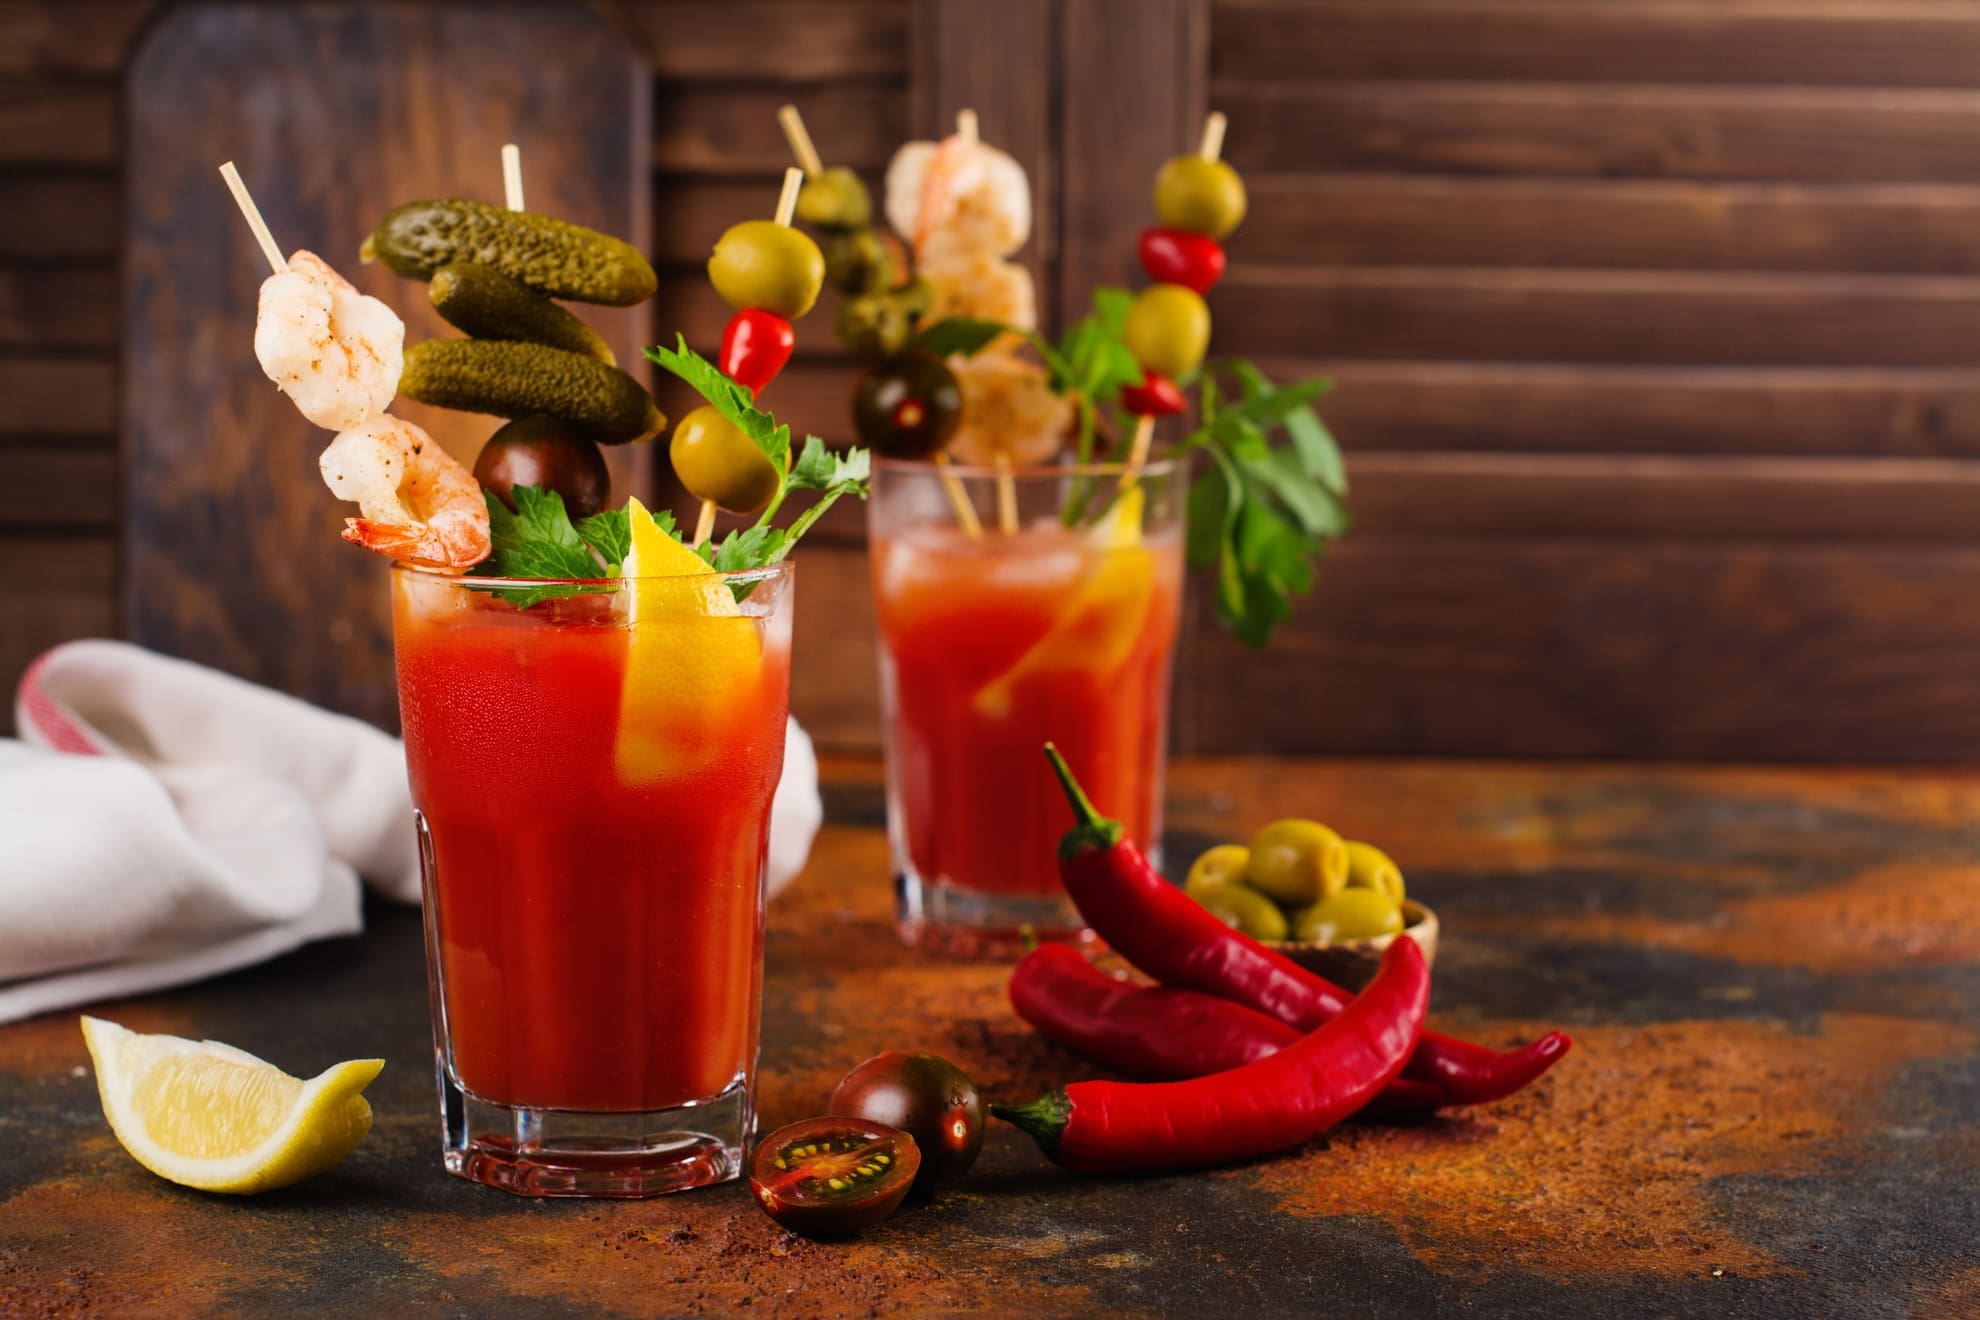 Bloody Mary cocktails